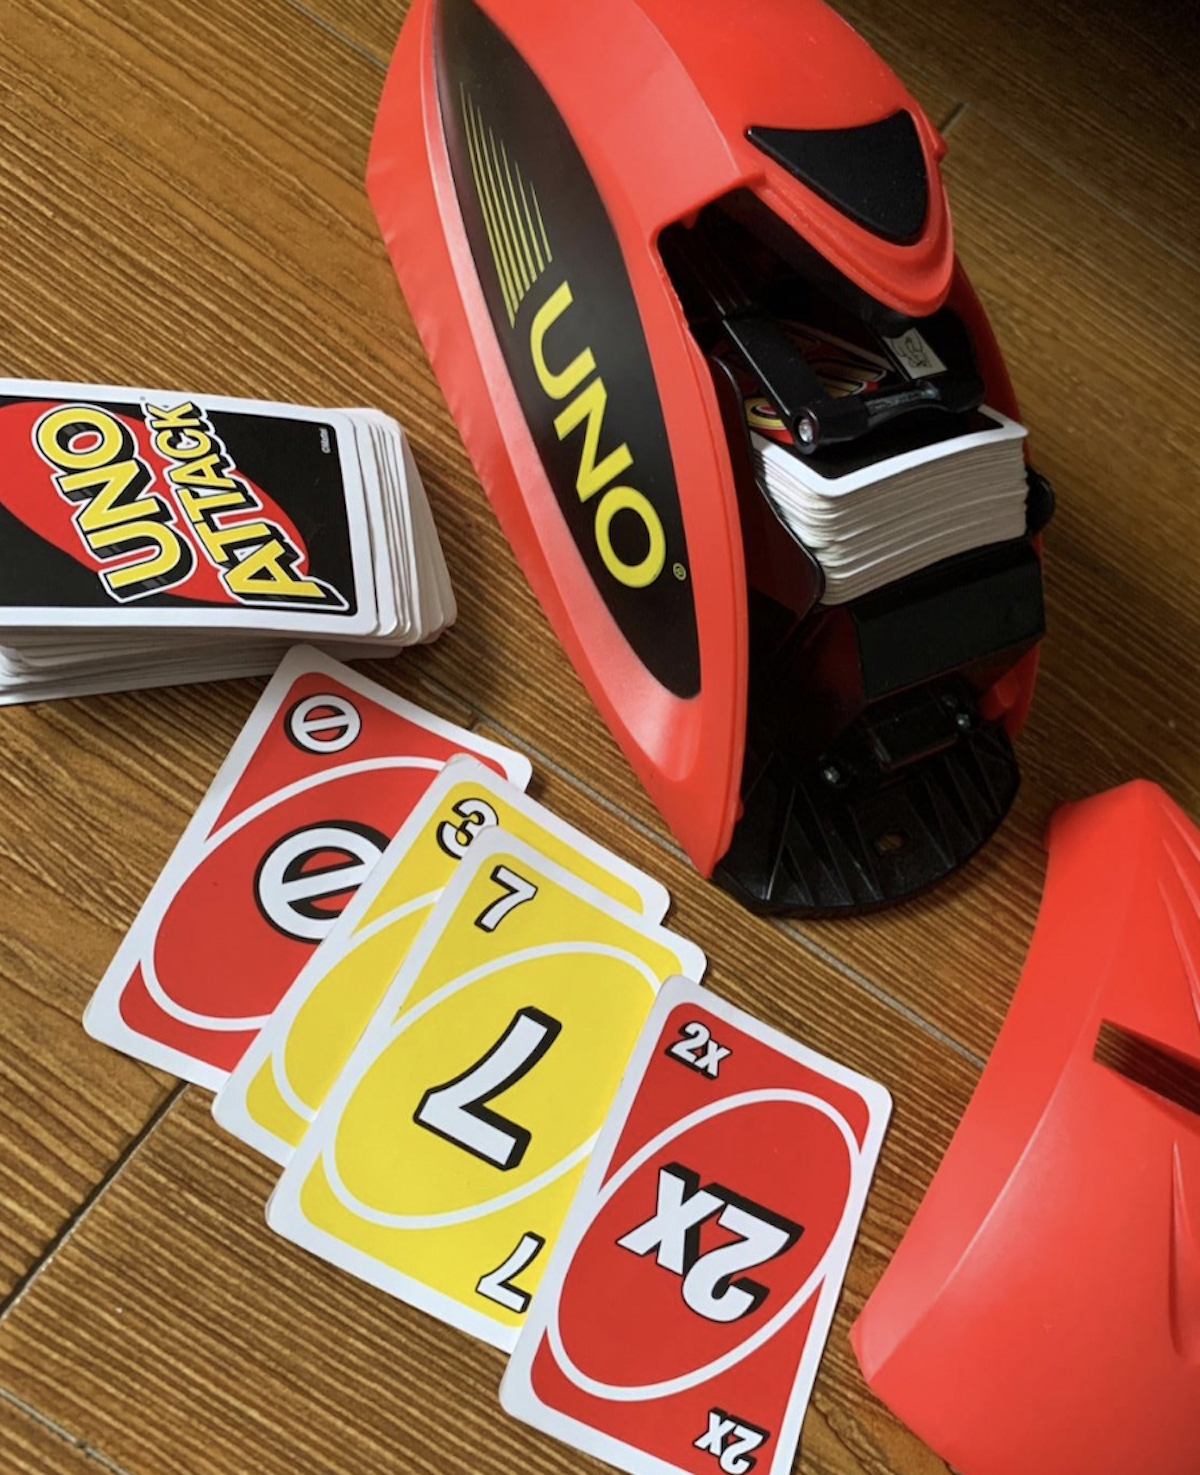 UNO Card Game - West Side Kids Inc